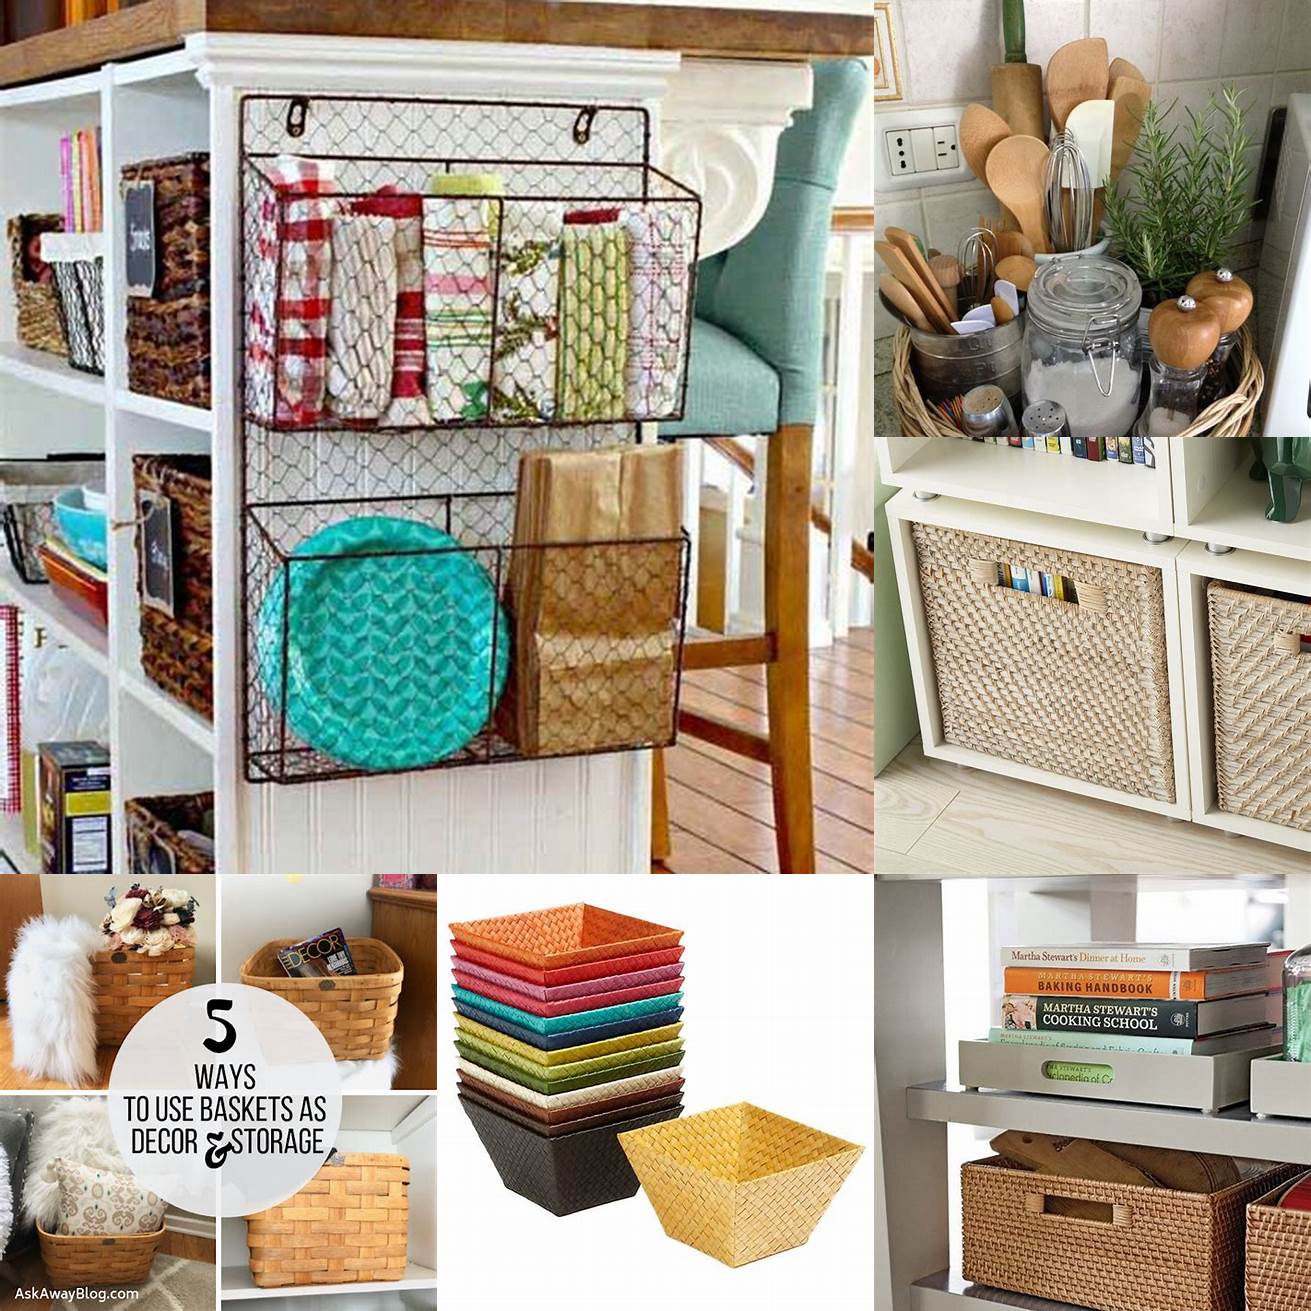 Use baskets or containers to corral smaller items